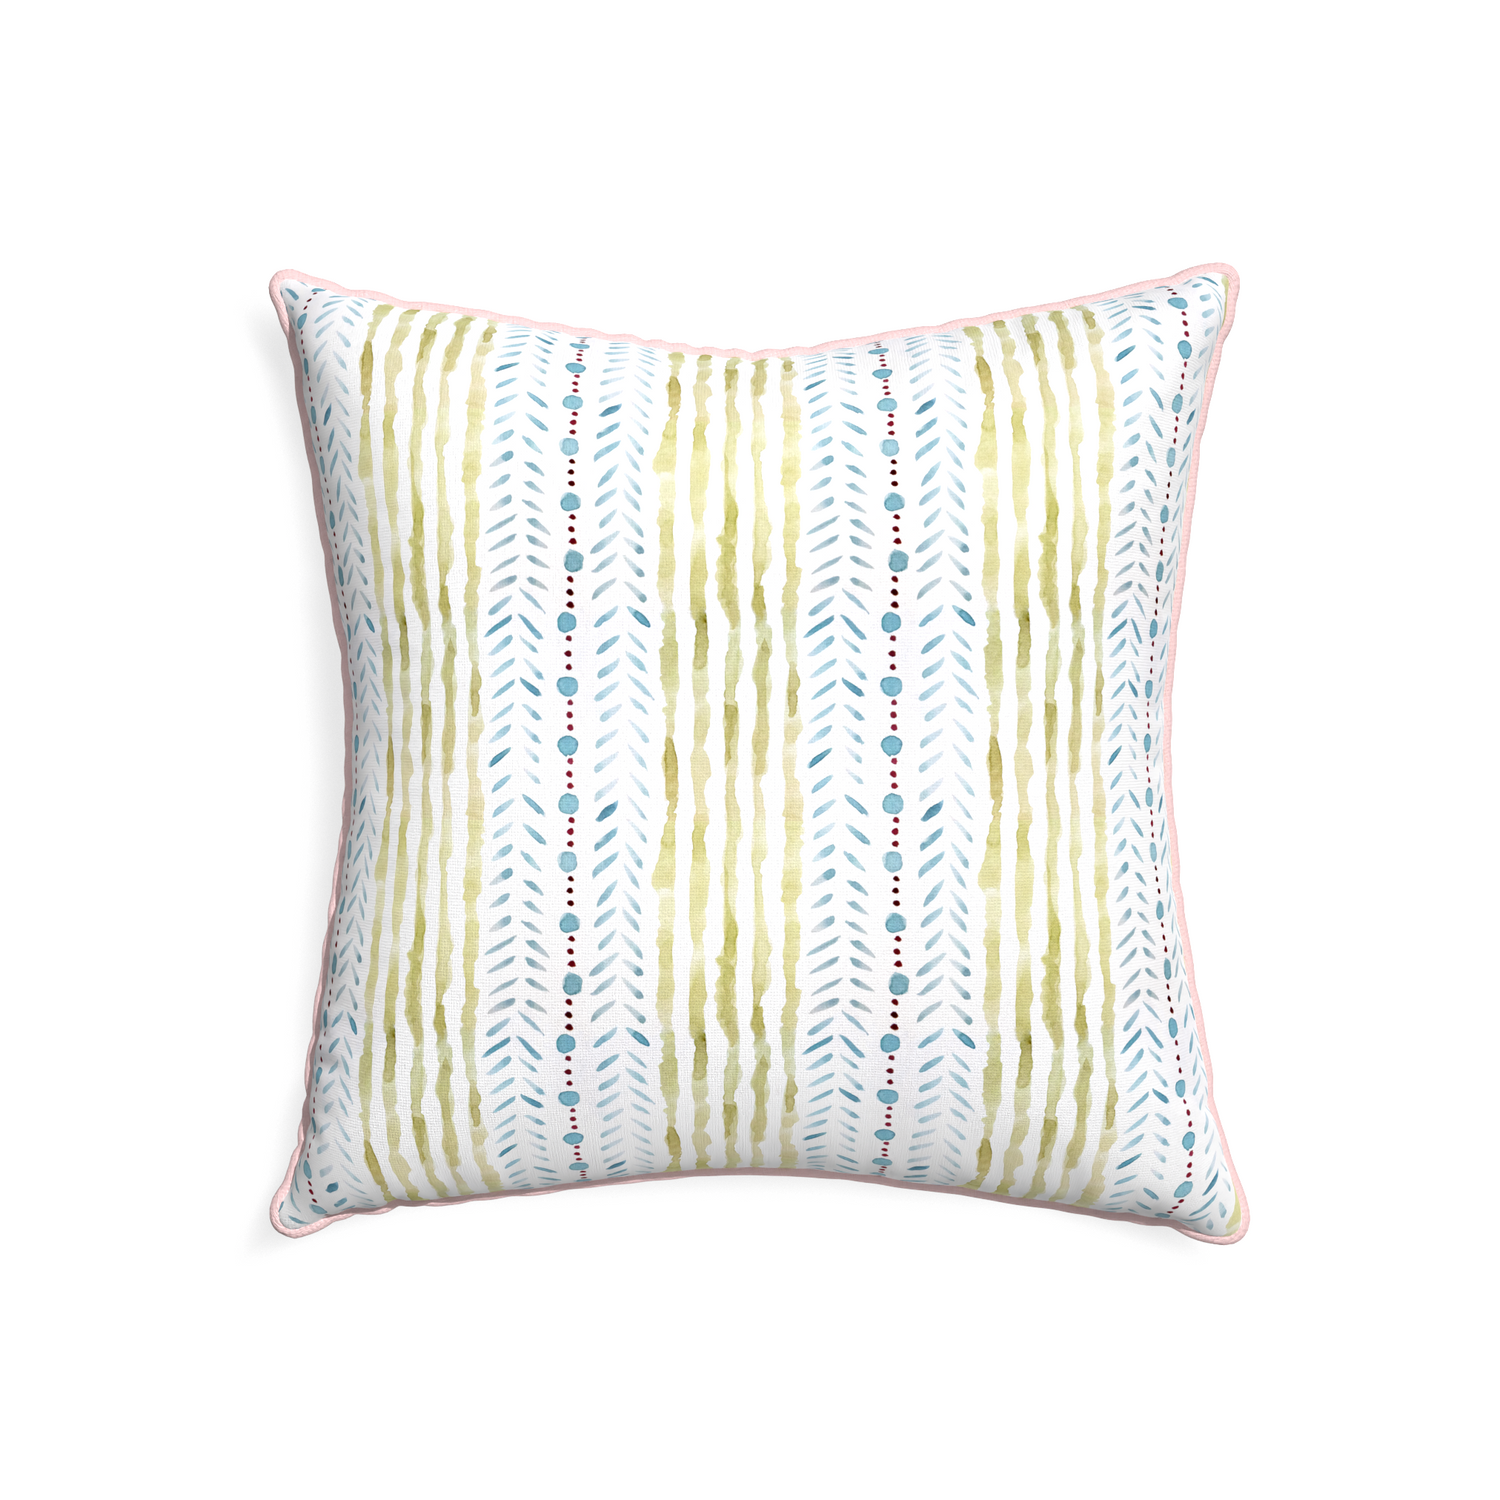 22-square julia custom pillow with petal piping on white background